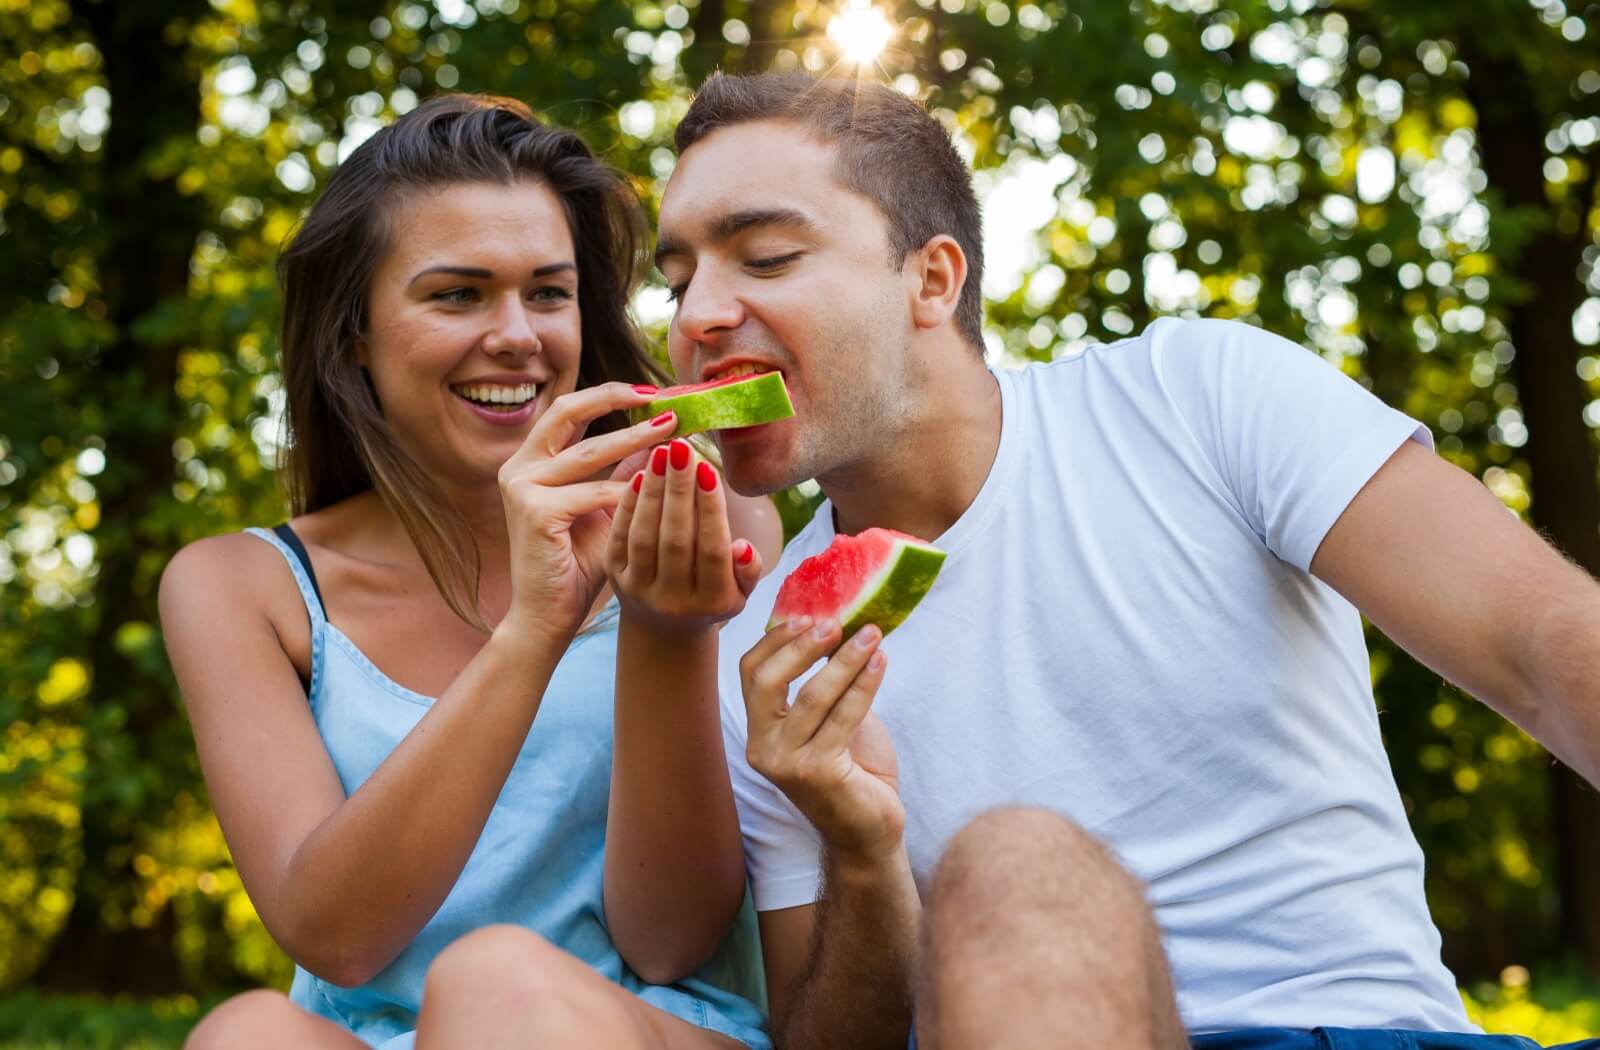 A young man taking a bite from a watermelon held by a woman beside him.